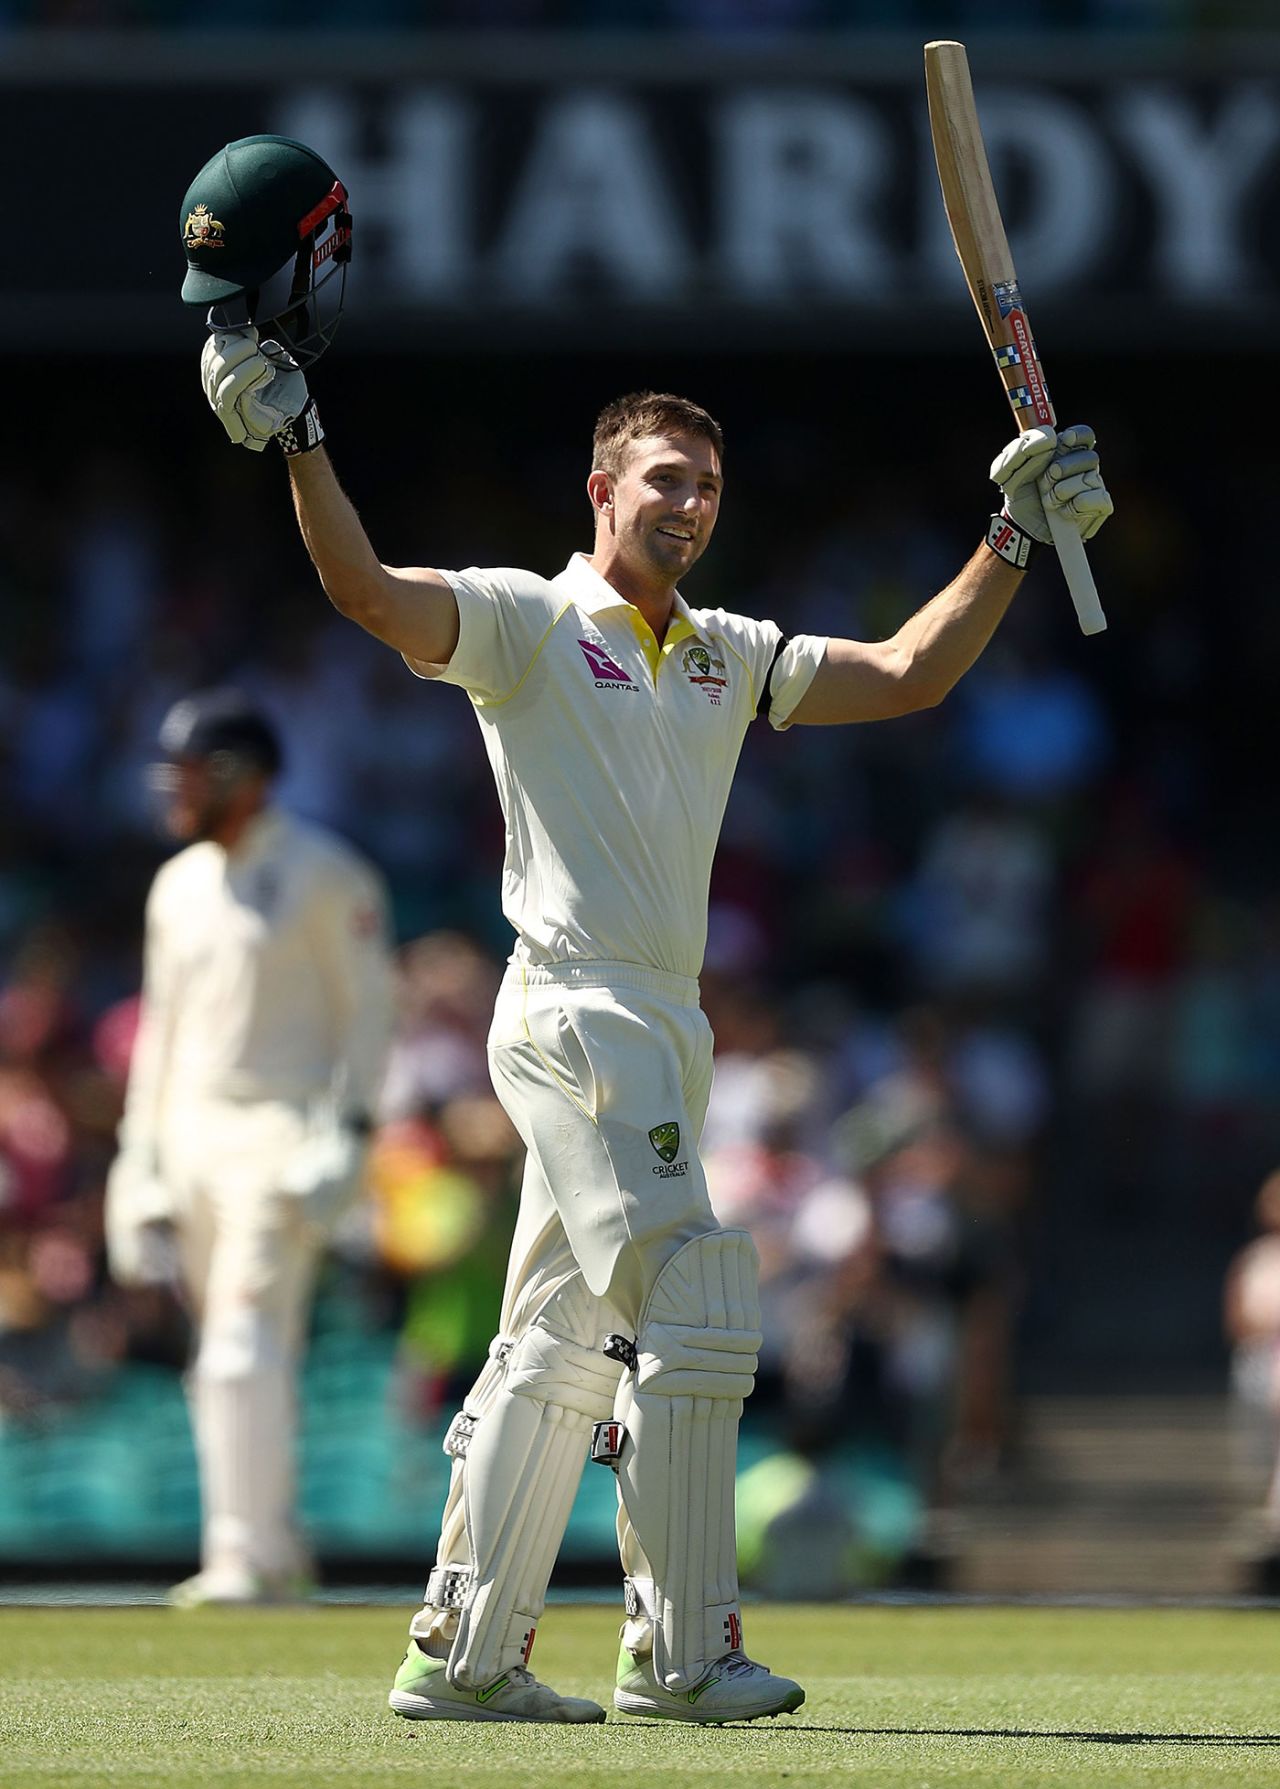 Shaun Marsh reached his hundred in the opening over of the day, Australia v England, 5th Test, Sydney, 4th day, January 7, 2018